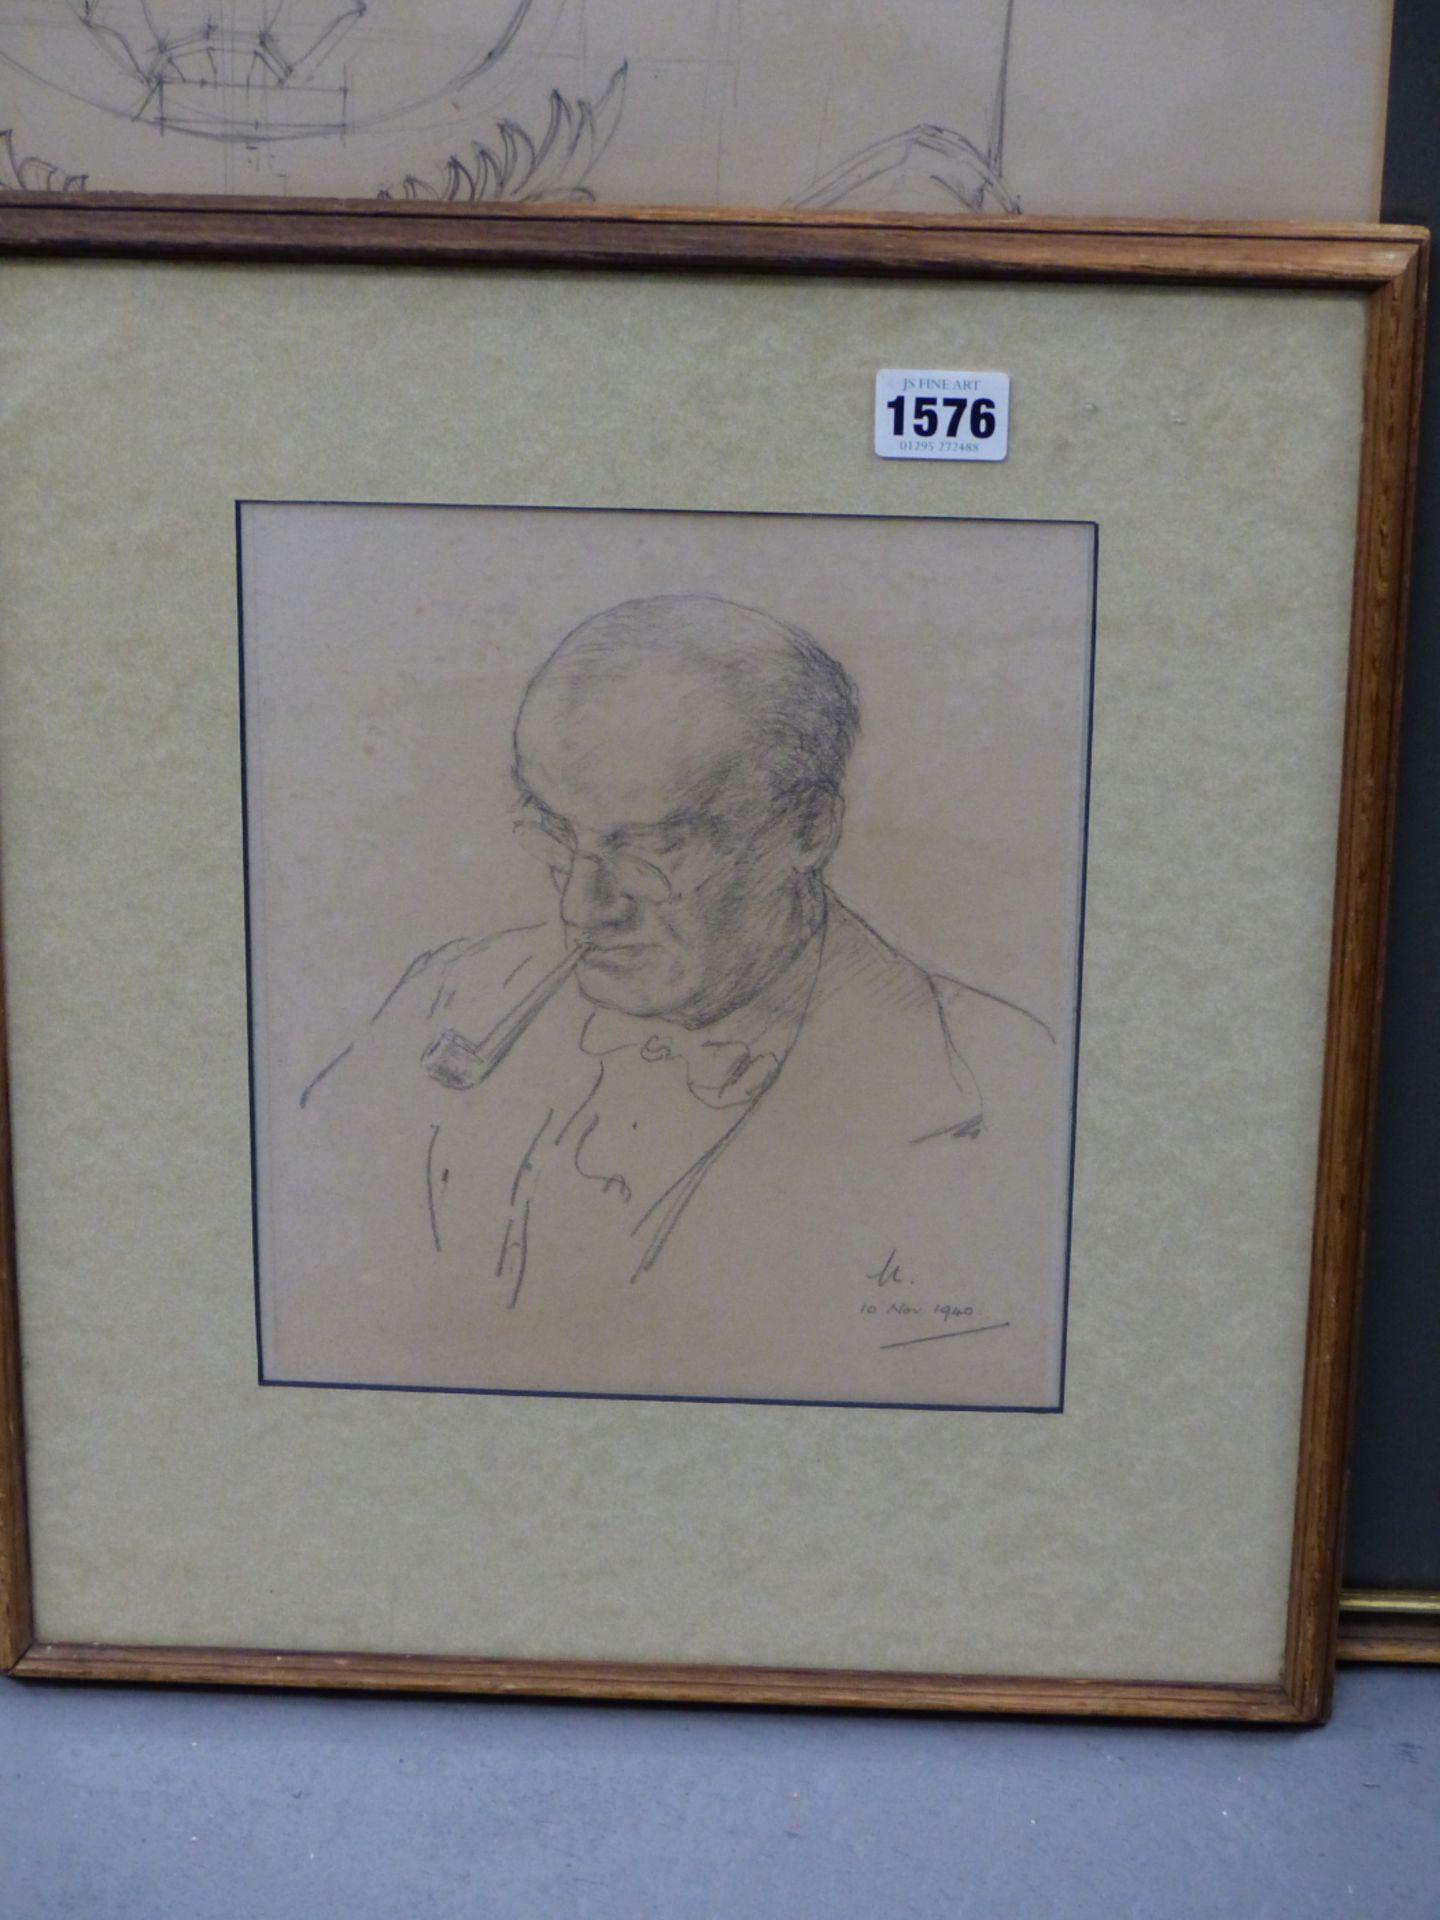 H. McDONALD CAMPBELL- PORTRAIT STUDY OF THE RT. HON. LORD MACMILLAN P.C, G.C.V.O- PENCIL ON PAPER, - Image 3 of 6